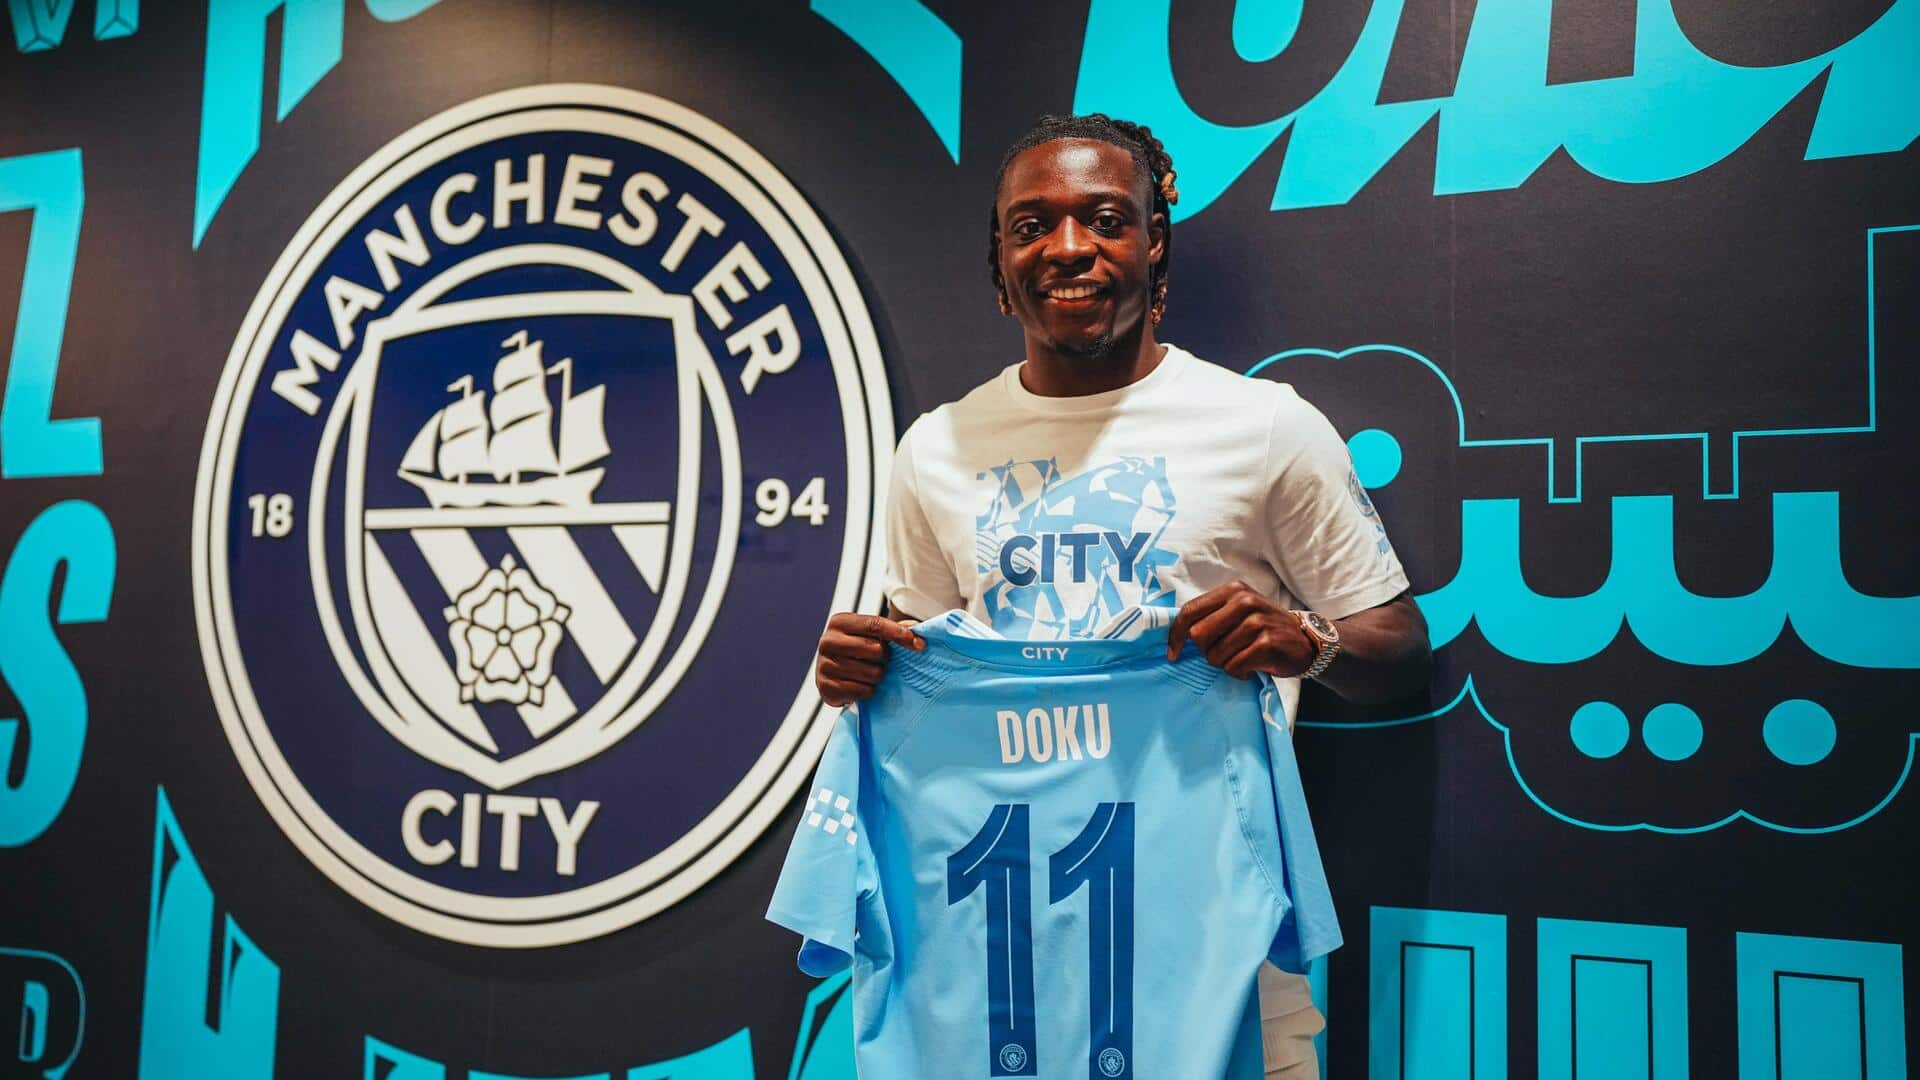 Manchester City sign Jeremy Doku for £55.4m: Decoding his stats